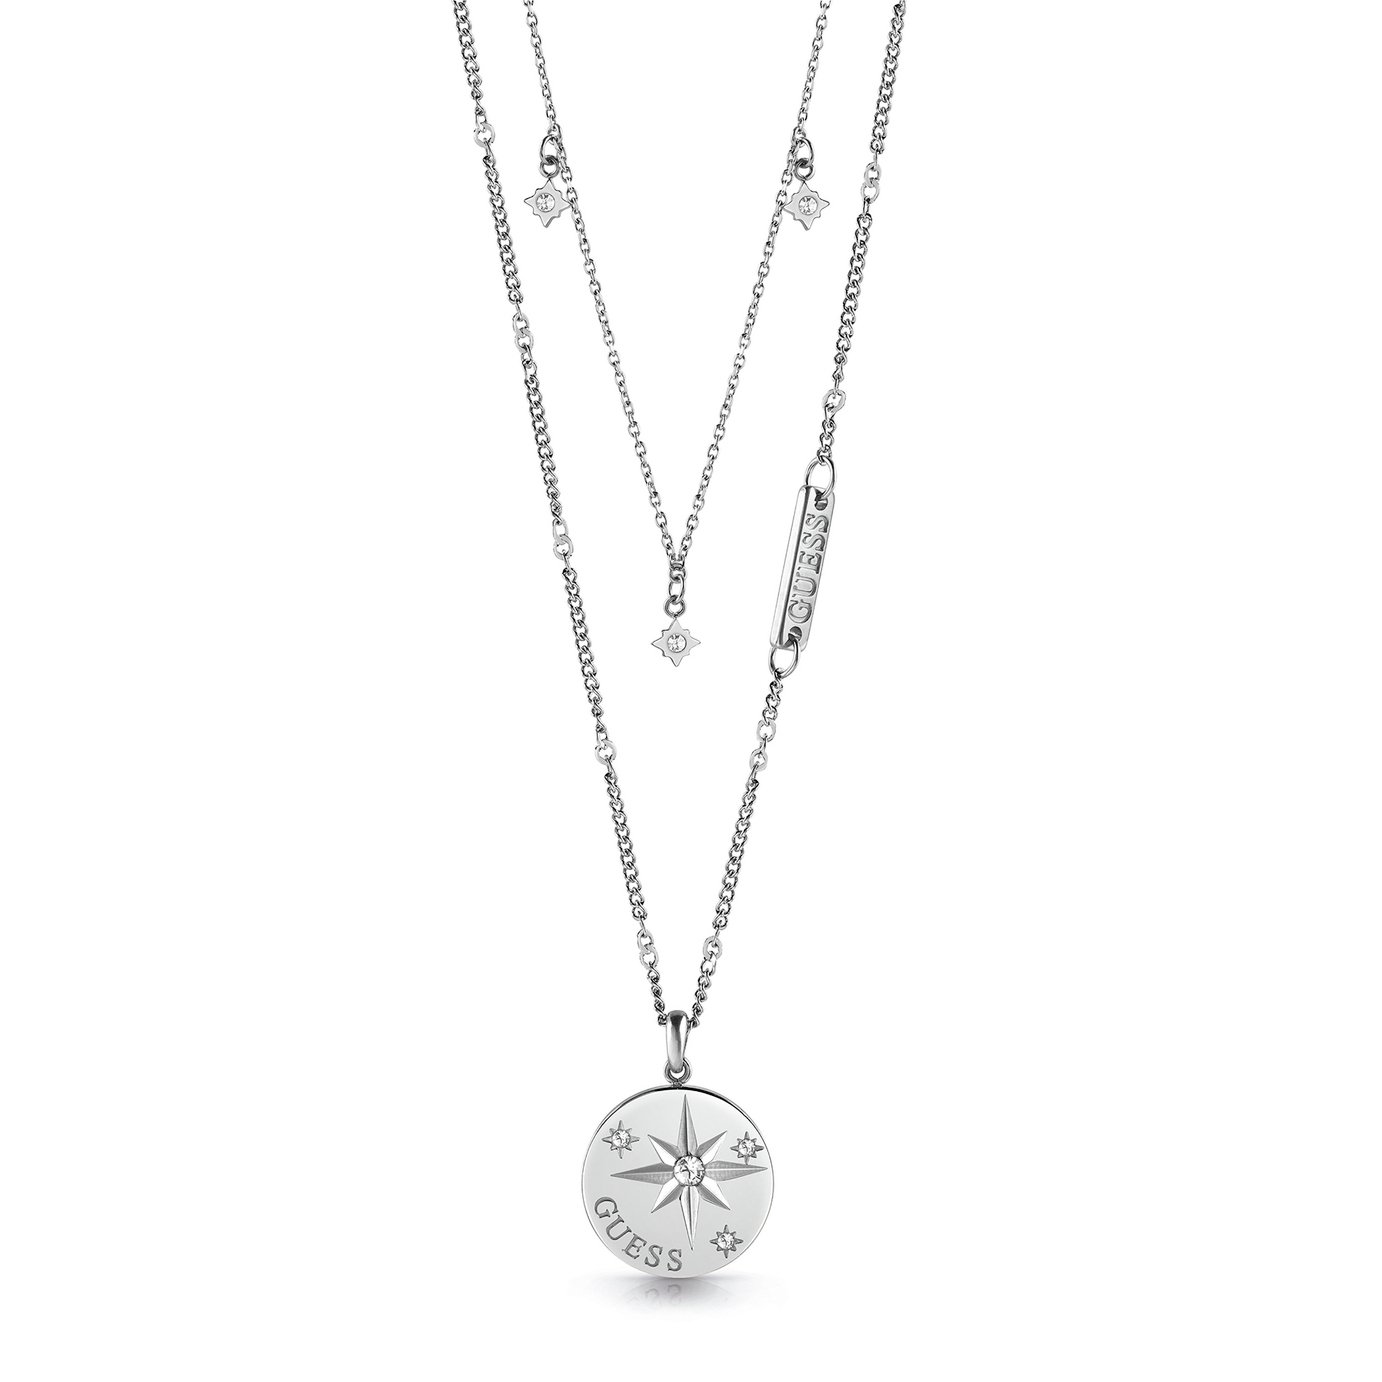 Guess Wanderlust Silver Plated Crystal Compass Necklace